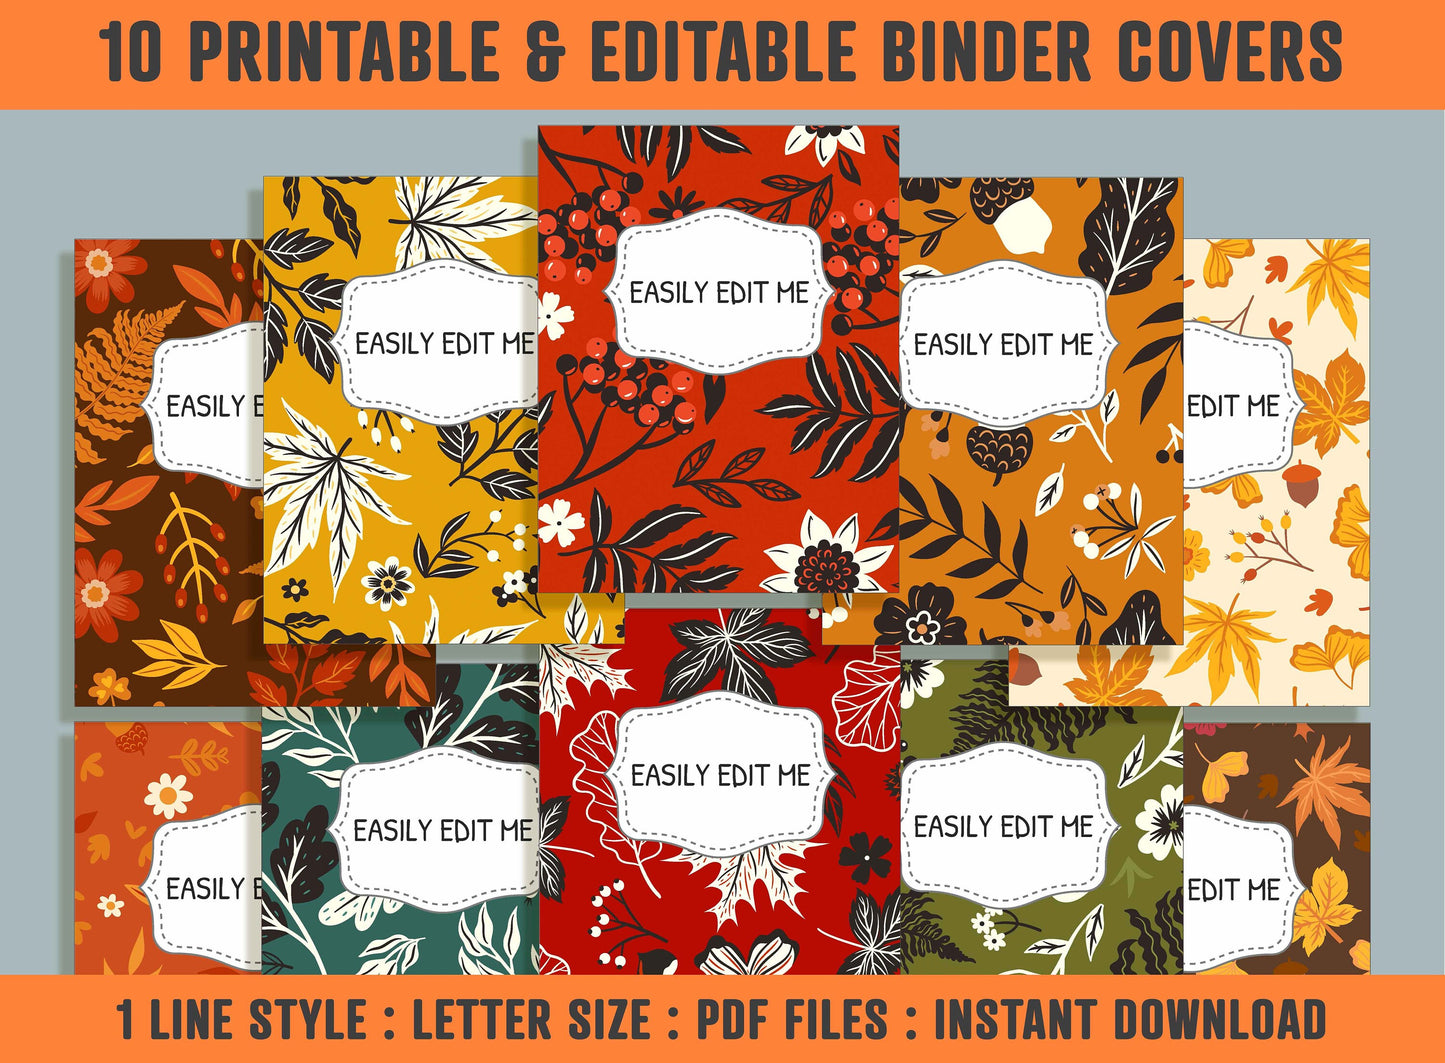 Autumn Leaves and Berries Binder Cover, 10 Printable/Editable Binder Covers + Spines, Planner Template, Teacher/School Binder Labels/Inserts